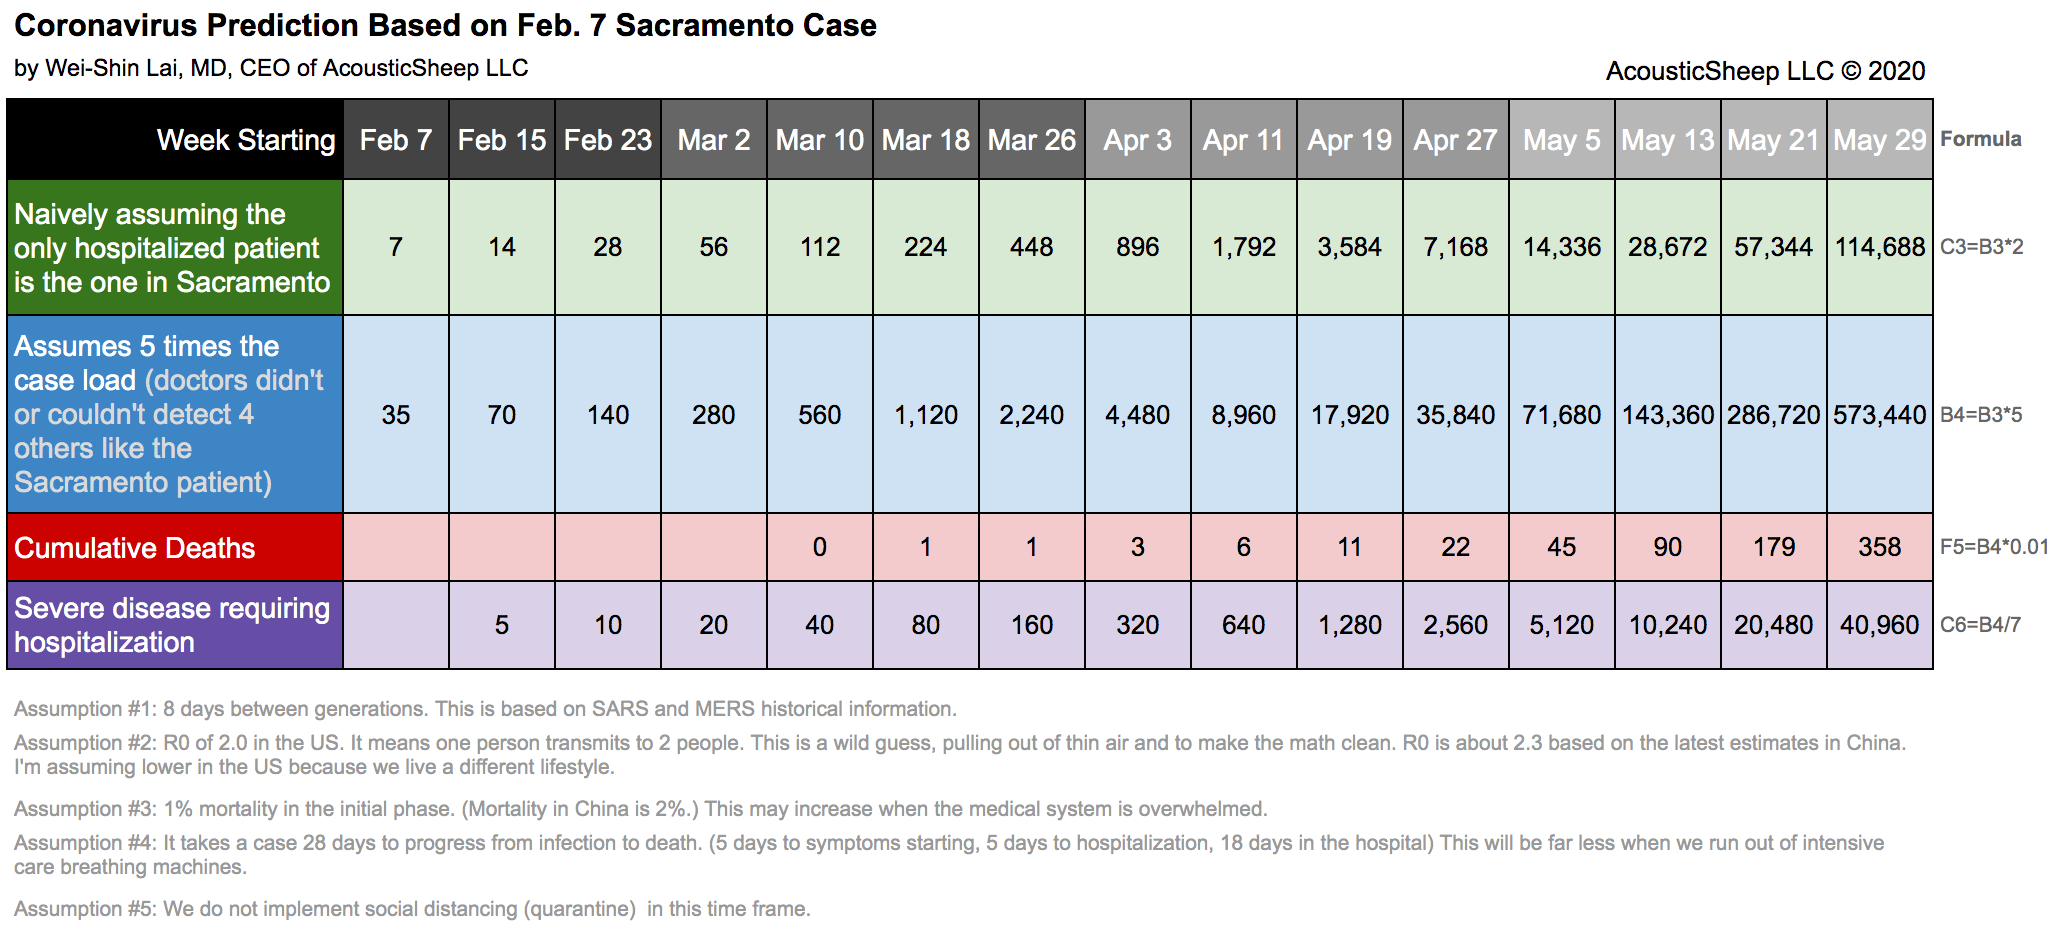 Coronavirus infection rate prediction chart. Created Feb 28th, 2020 based on Feb 7th Sacramento death. Predicts hospitalizations, case load, cumulative deaths, and severe disease requiring hospitalization. Created by Dr. Wei-Shin Lai, CEO of SleepPhones